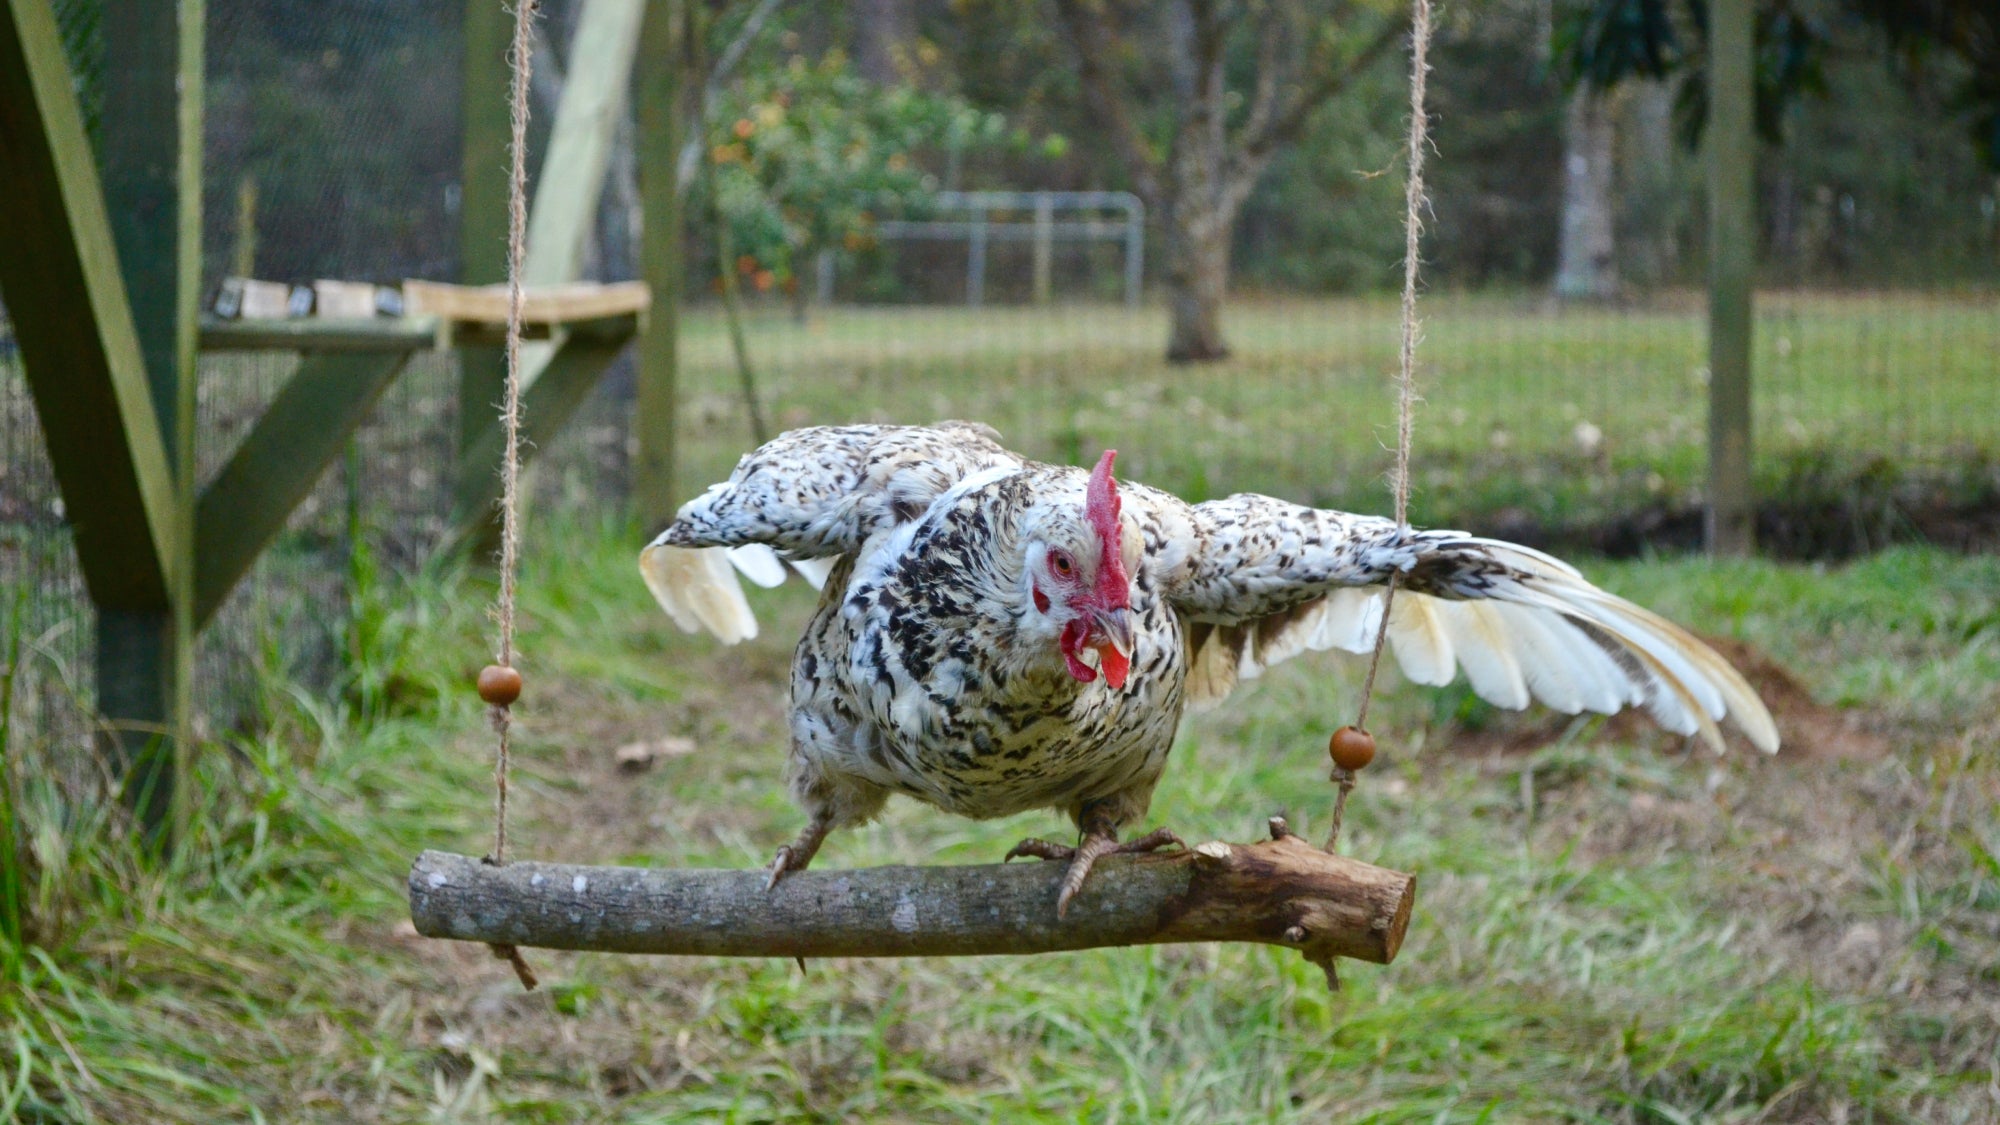 A black-and-white hen on a DIY chicken swing with wings outstretched.